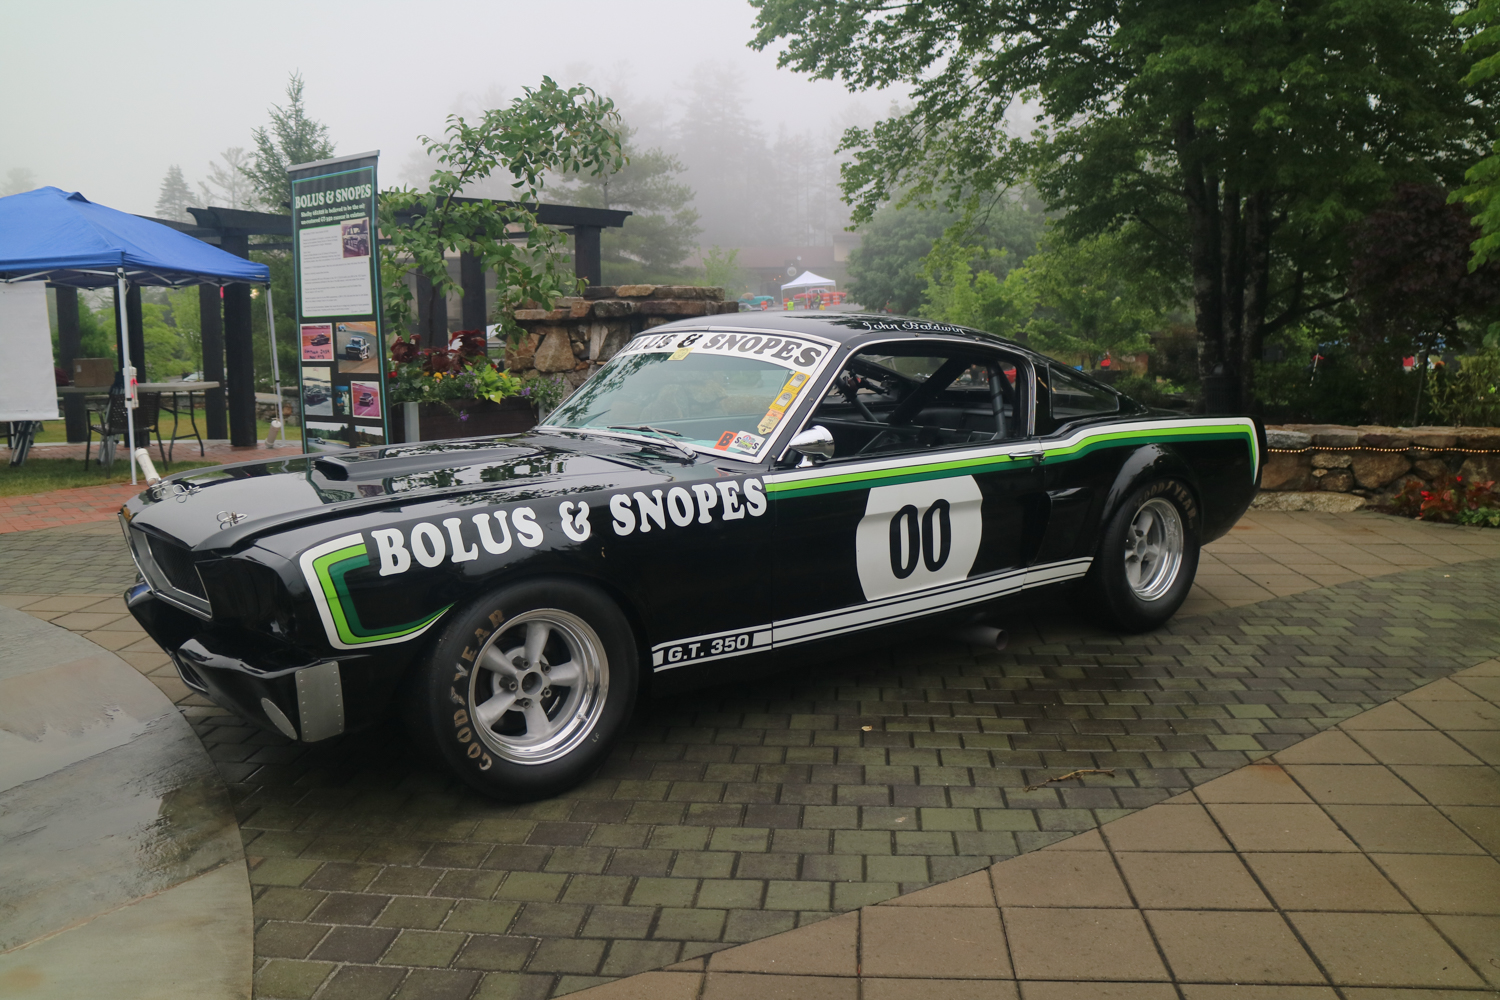 What a great racer - Bolus & Snopes GT 350.